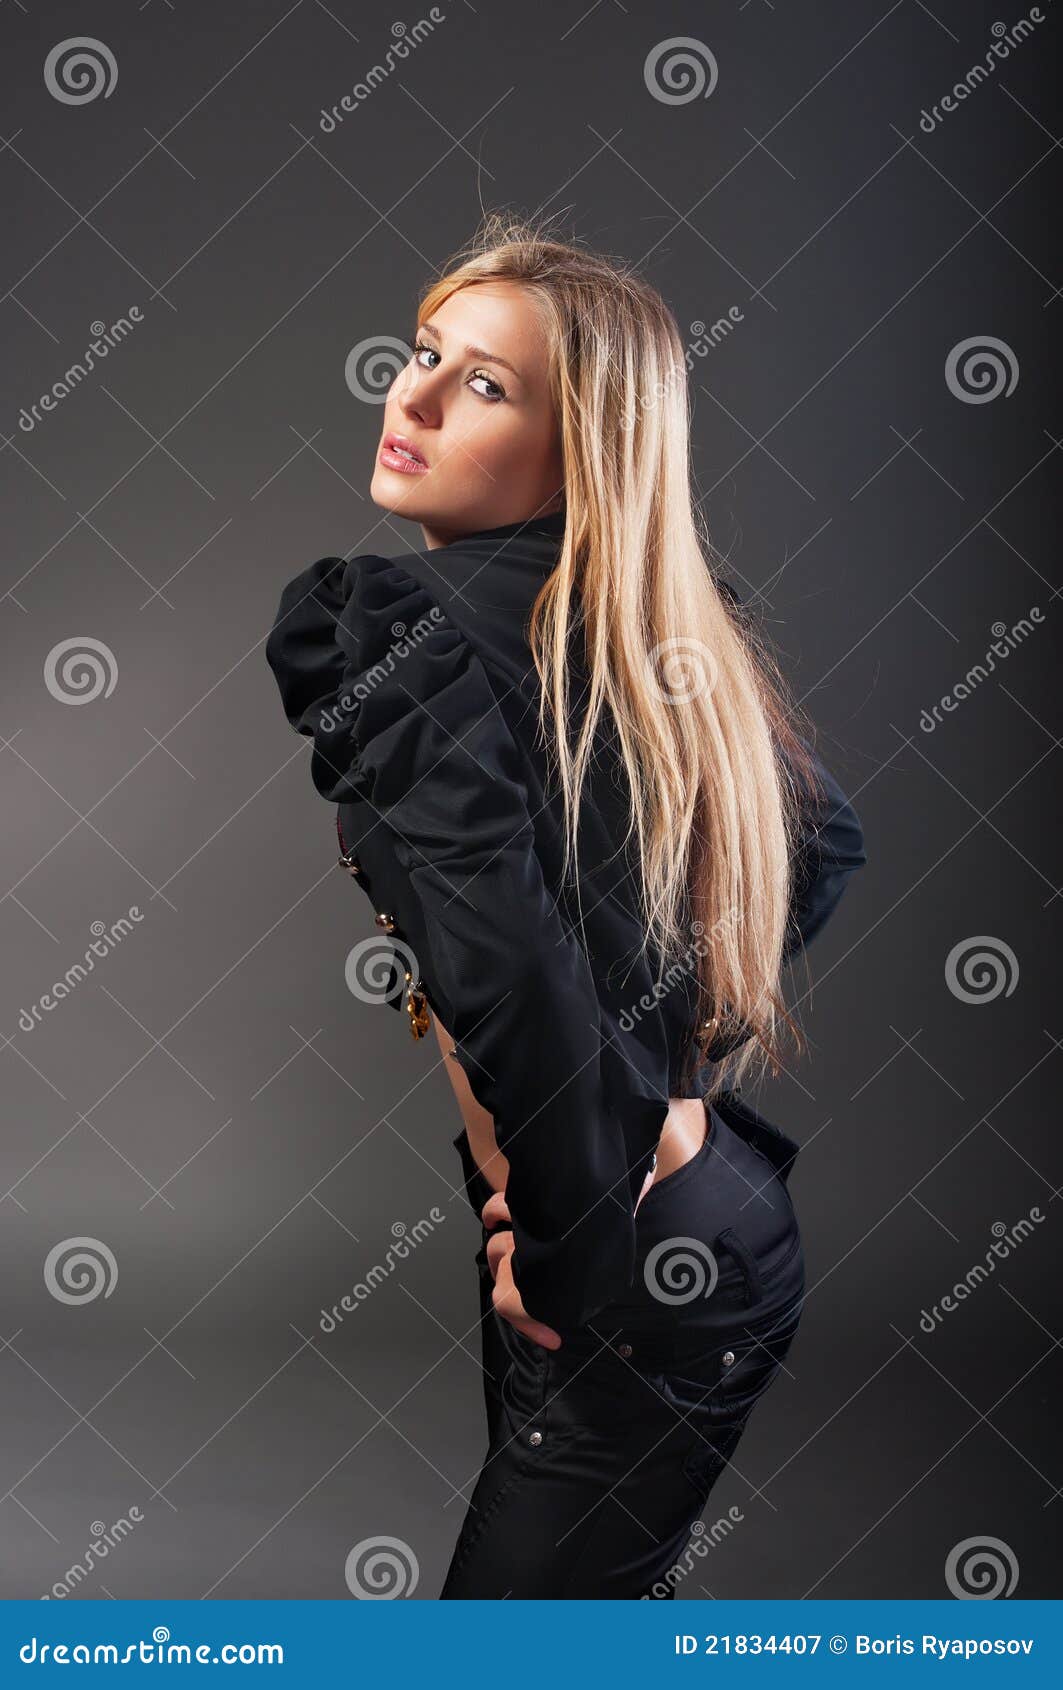 Fashion Portrait of Young Woman Stock Image - Image of blowing ...